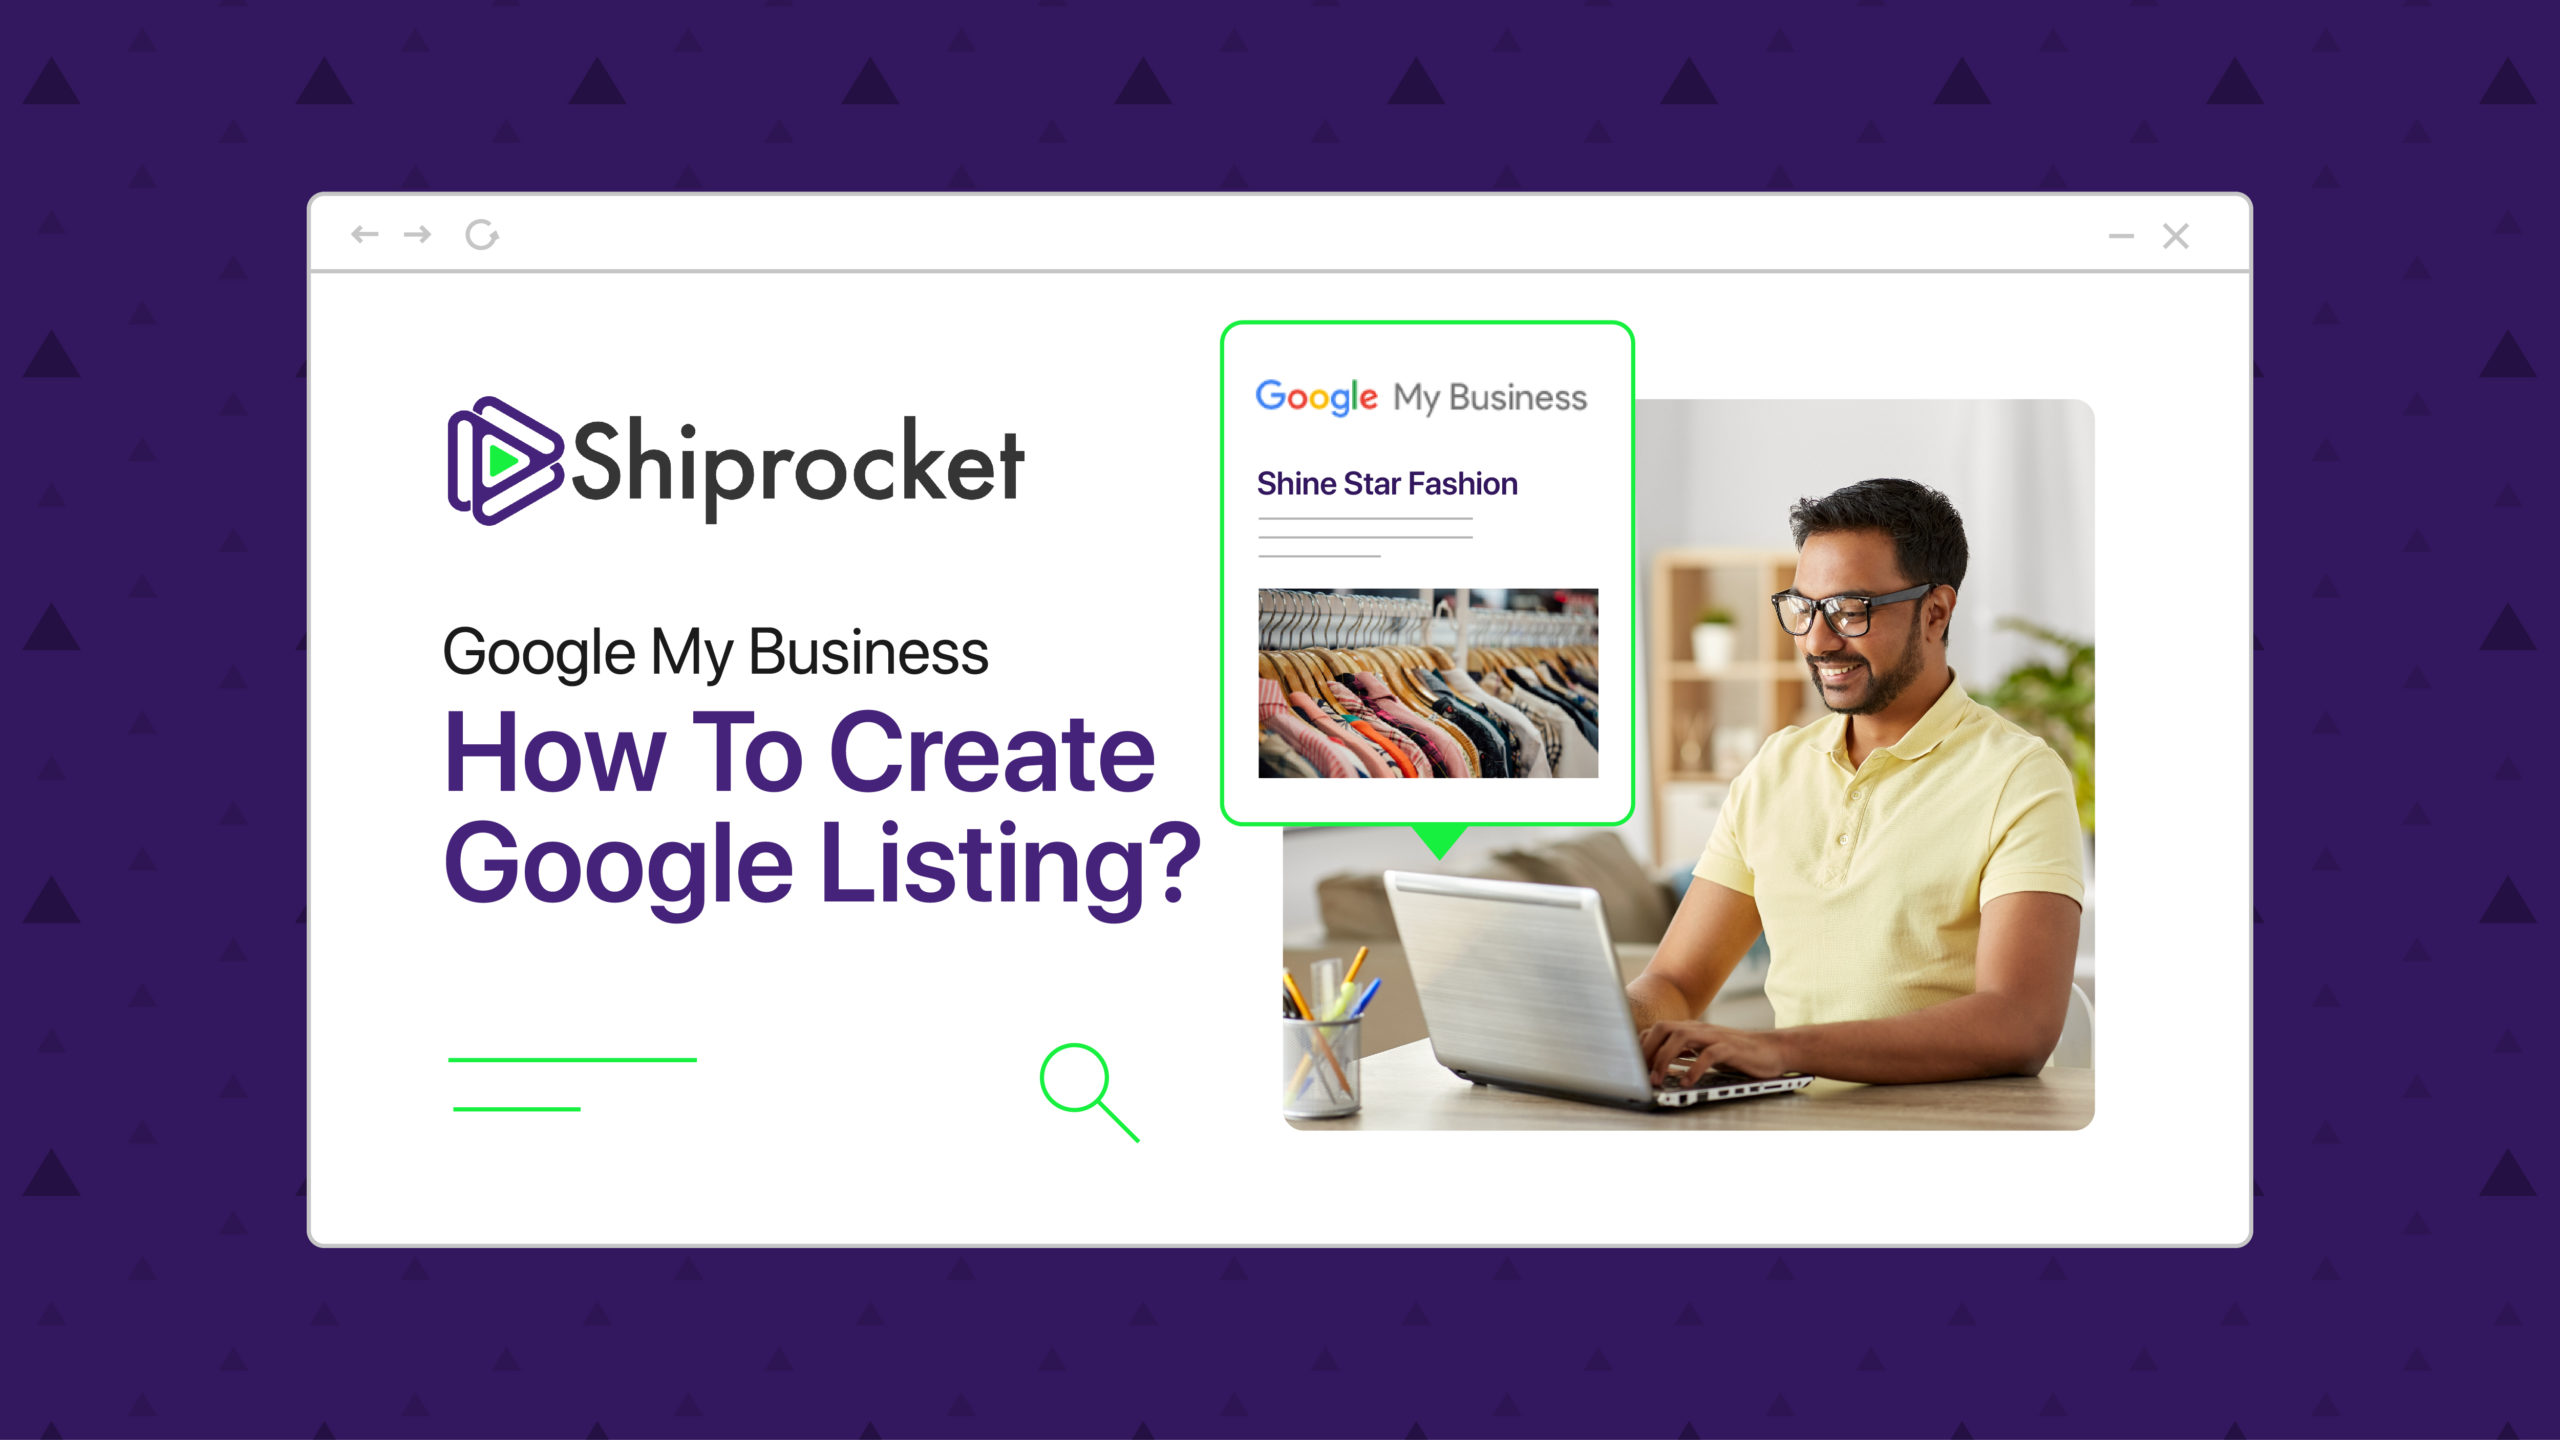 Google My Business: How To Create Google Listing?